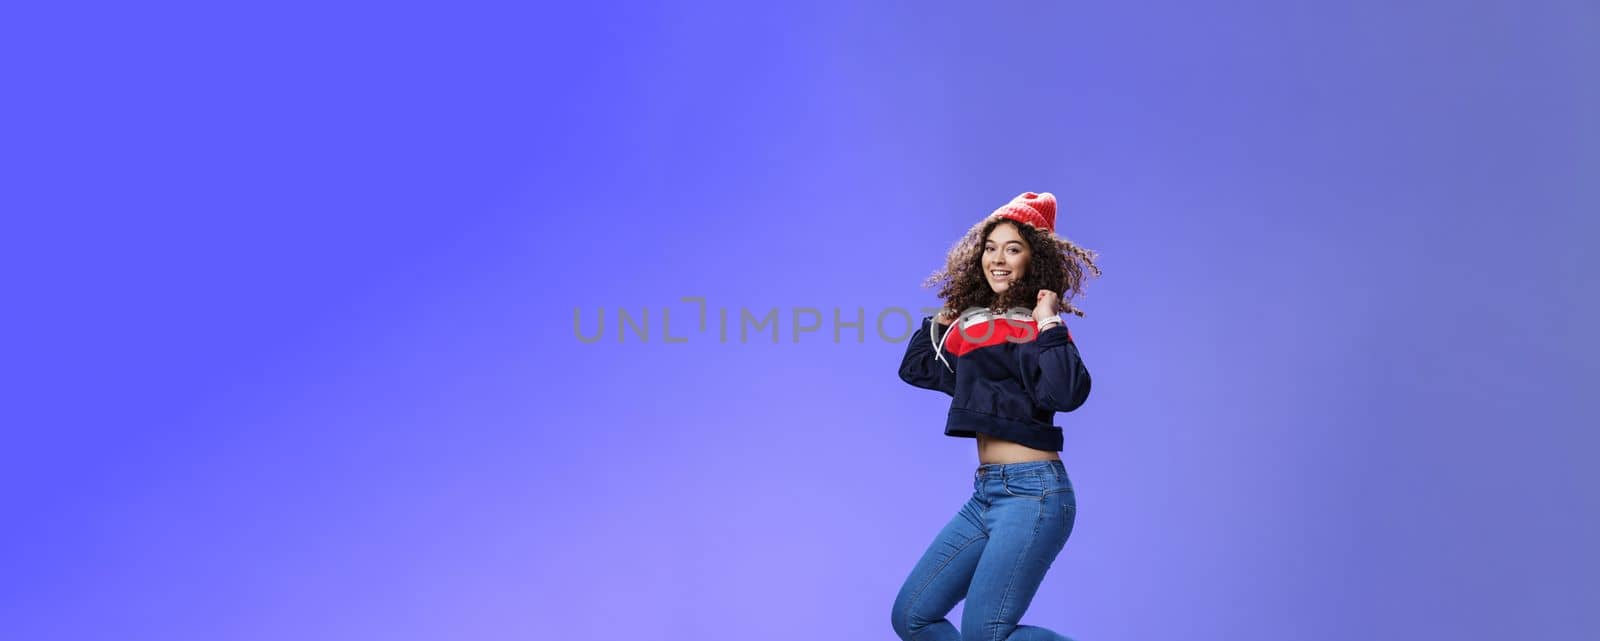 Studio shot of cute girl with curly hair in beanie sweatshirt and sneakers jumping playful and carefree over blue background, having fun enjoying cool weather smiling broadly as flying in air.